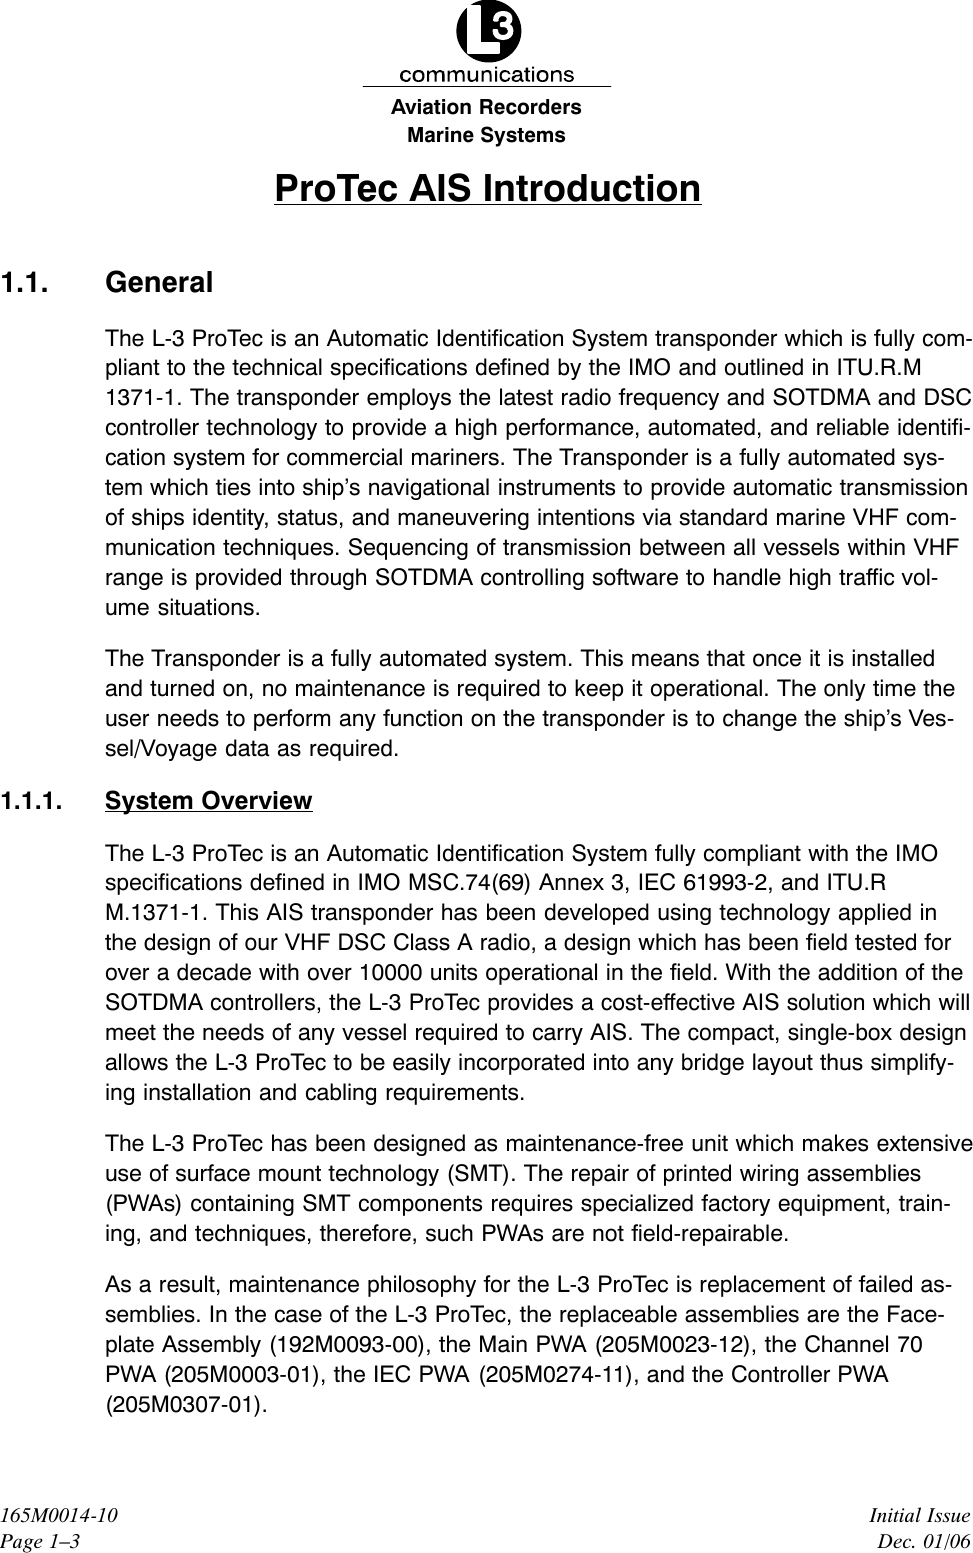 Marine SystemsAviation RecordersInitial IssueDec. 01/06165M0014-10Page 1–3ProTec AIS Introduction1.1. GeneralThe L-3 ProTec is an Automatic Identification System transponder which is fully com-pliant to the technical specifications defined by the IMO and outlined in ITU.R.M1371-1. The transponder employs the latest radio frequency and SOTDMA and DSCcontroller technology to provide a high performance, automated, and reliable identifi-cation system for commercial mariners. The Transponder is a fully automated sys-tem which ties into ship’s navigational instruments to provide automatic transmissionof ships identity, status, and maneuvering intentions via standard marine VHF com-munication techniques. Sequencing of transmission between all vessels within VHFrange is provided through SOTDMA controlling software to handle high traffic vol-ume situations.The Transponder is a fully automated system. This means that once it is installedand turned on, no maintenance is required to keep it operational. The only time theuser needs to perform any function on the transponder is to change the ship’s Ves-sel/Voyage data as required.1.1.1. System OverviewThe L-3 ProTec is an Automatic Identification System fully compliant with the IMOspecifications defined in IMO MSC.74(69) Annex 3, IEC 61993-2, and ITU.RM.1371-1. This AIS transponder has been developed using technology applied inthe design of our VHF DSC Class A radio, a design which has been field tested forover a decade with over 10000 units operational in the field. With the addition of theSOTDMA controllers, the L-3 ProTec provides a cost-effective AIS solution which willmeet the needs of any vessel required to carry AIS. The compact, single-box designallows the L-3 ProTec to be easily incorporated into any bridge layout thus simplify-ing installation and cabling requirements.The L-3 ProTec has been designed as maintenance-free unit which makes extensiveuse of surface mount technology (SMT). The repair of printed wiring assemblies(PWAs) containing SMT components requires specialized factory equipment, train-ing, and techniques, therefore, such PWAs are not field-repairable.As a result, maintenance philosophy for the L-3 ProTec is replacement of failed as-semblies. In the case of the L-3 ProTec, the replaceable assemblies are the Face-plate Assembly (192M0093-00), the Main PWA (205M0023-12), the Channel 70PWA (205M0003-01), the IEC PWA (205M0274-11), and the Controller PWA(205M0307-01).